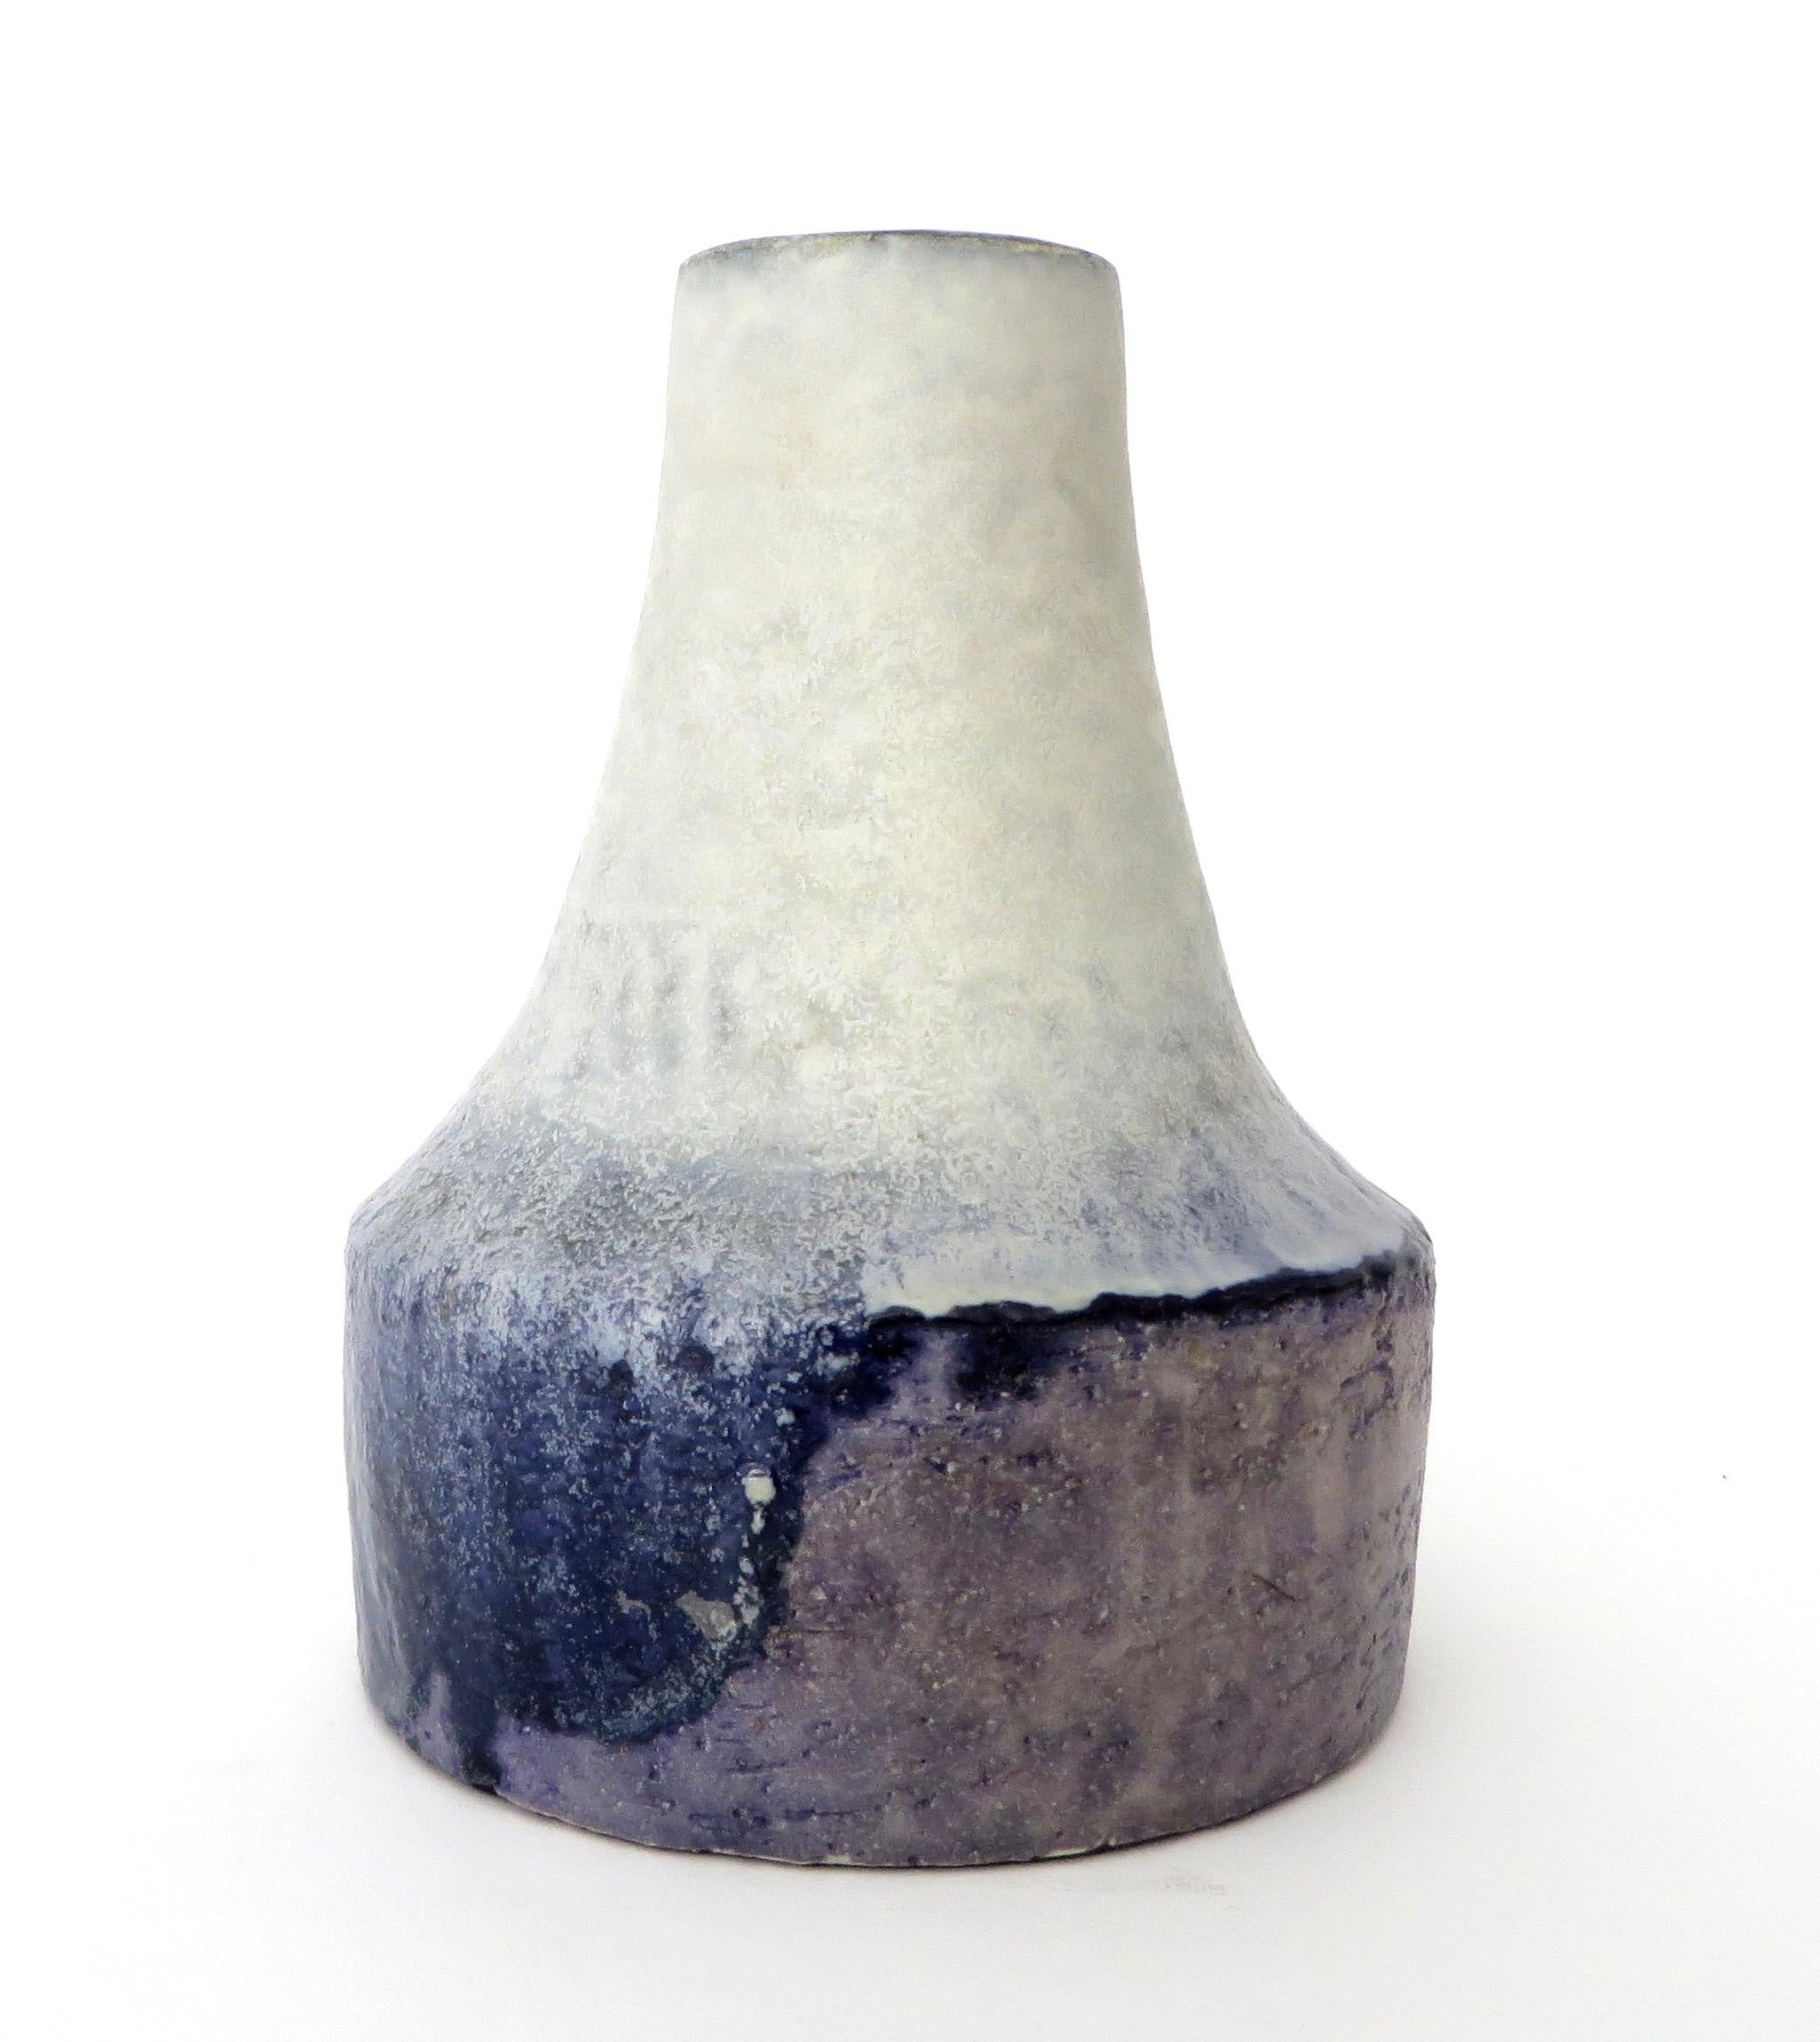 Beautiful and unusual color palette and painterly glazed ceramic vase by Marcello Fantoni.
The cream body with blue edged rim and then the blue breaking in nice waves down the middle of the vase and ending in light purple make this a very unusual